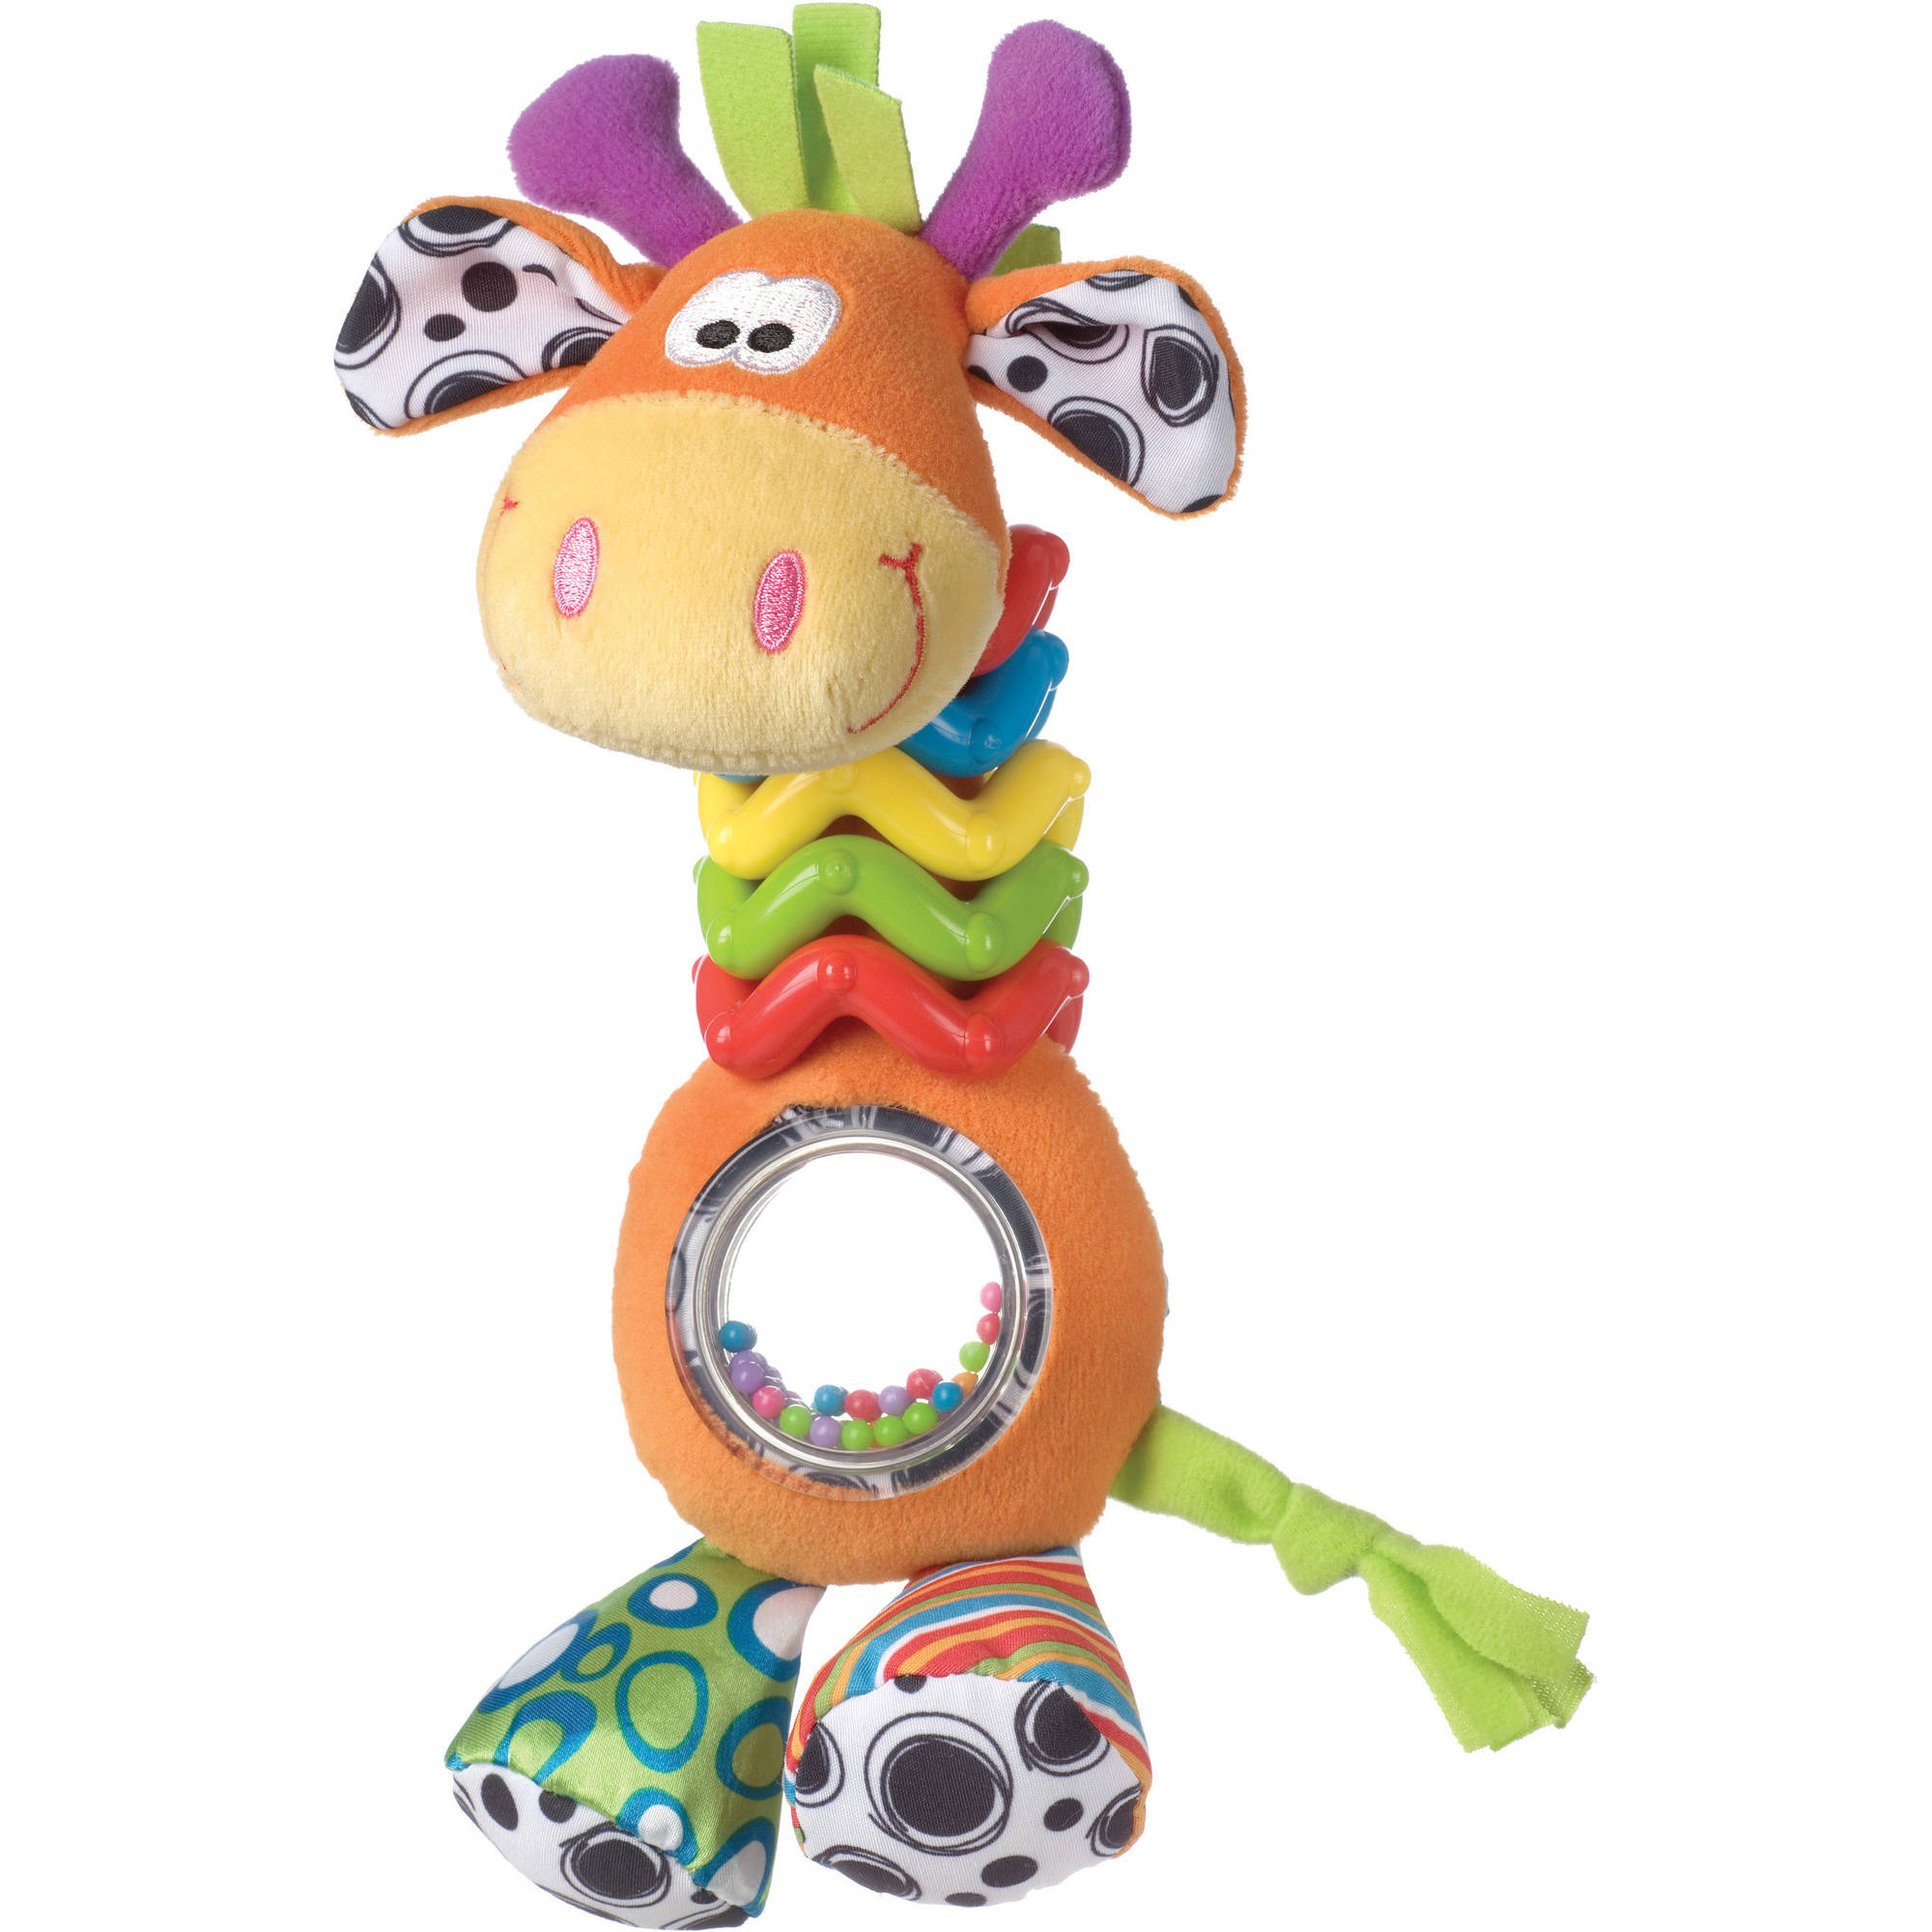 Playgro Bead Buddy Giraffe Baby Rattling and Teething Toy, 3 Months and Up - image 1 of 8